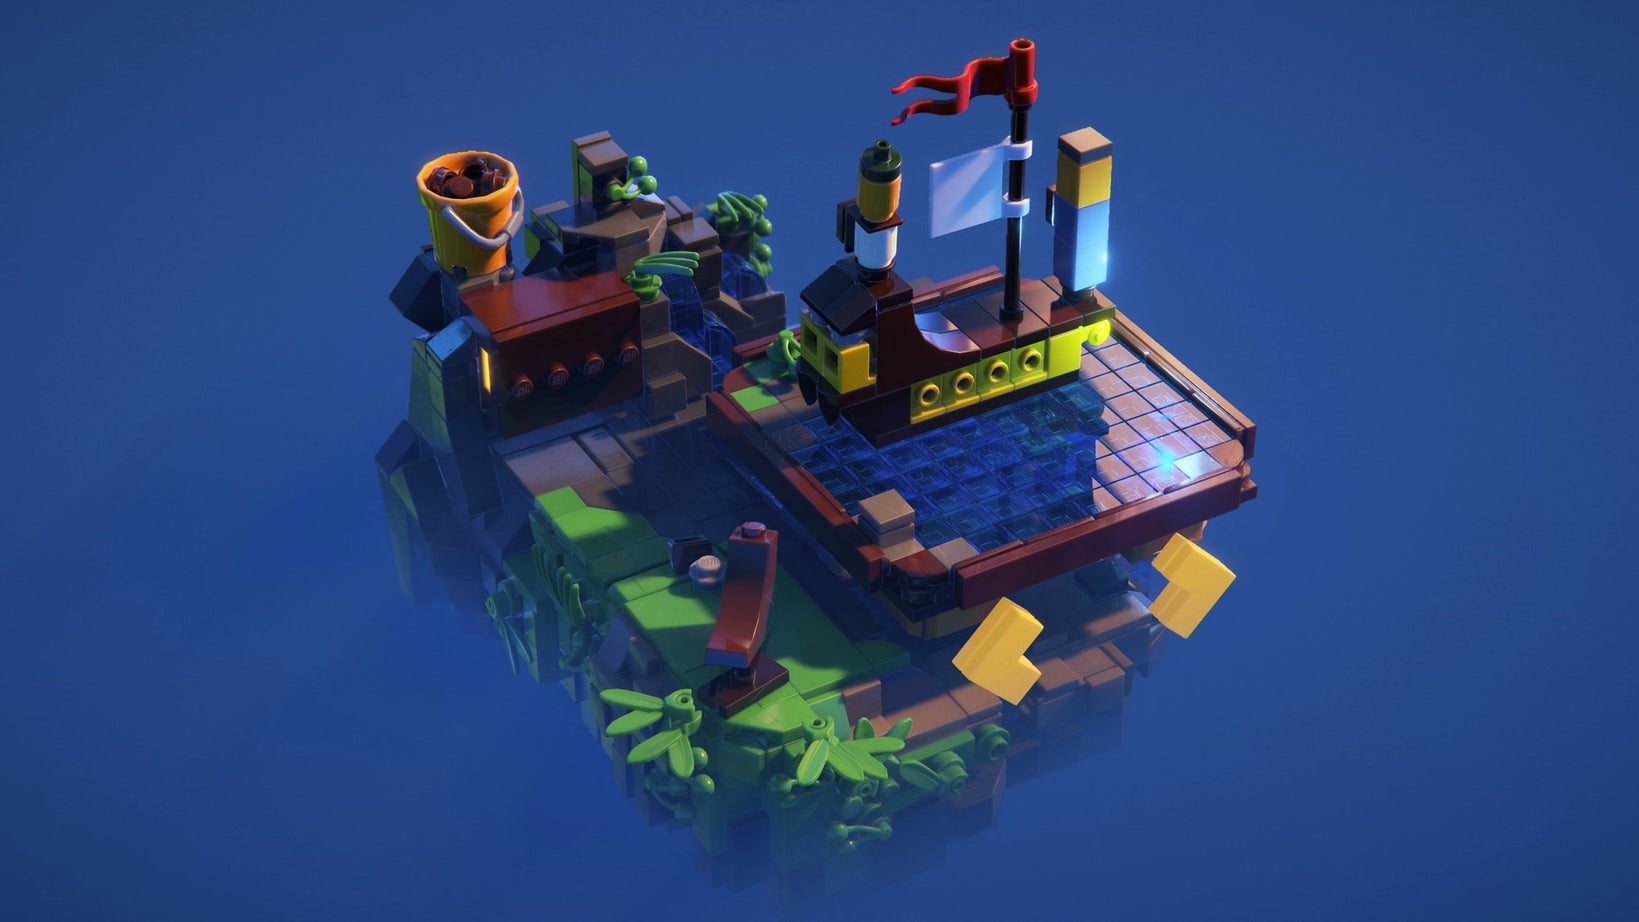 A screenshot from Lego Builder's Journey showing a minifig aboard a ship